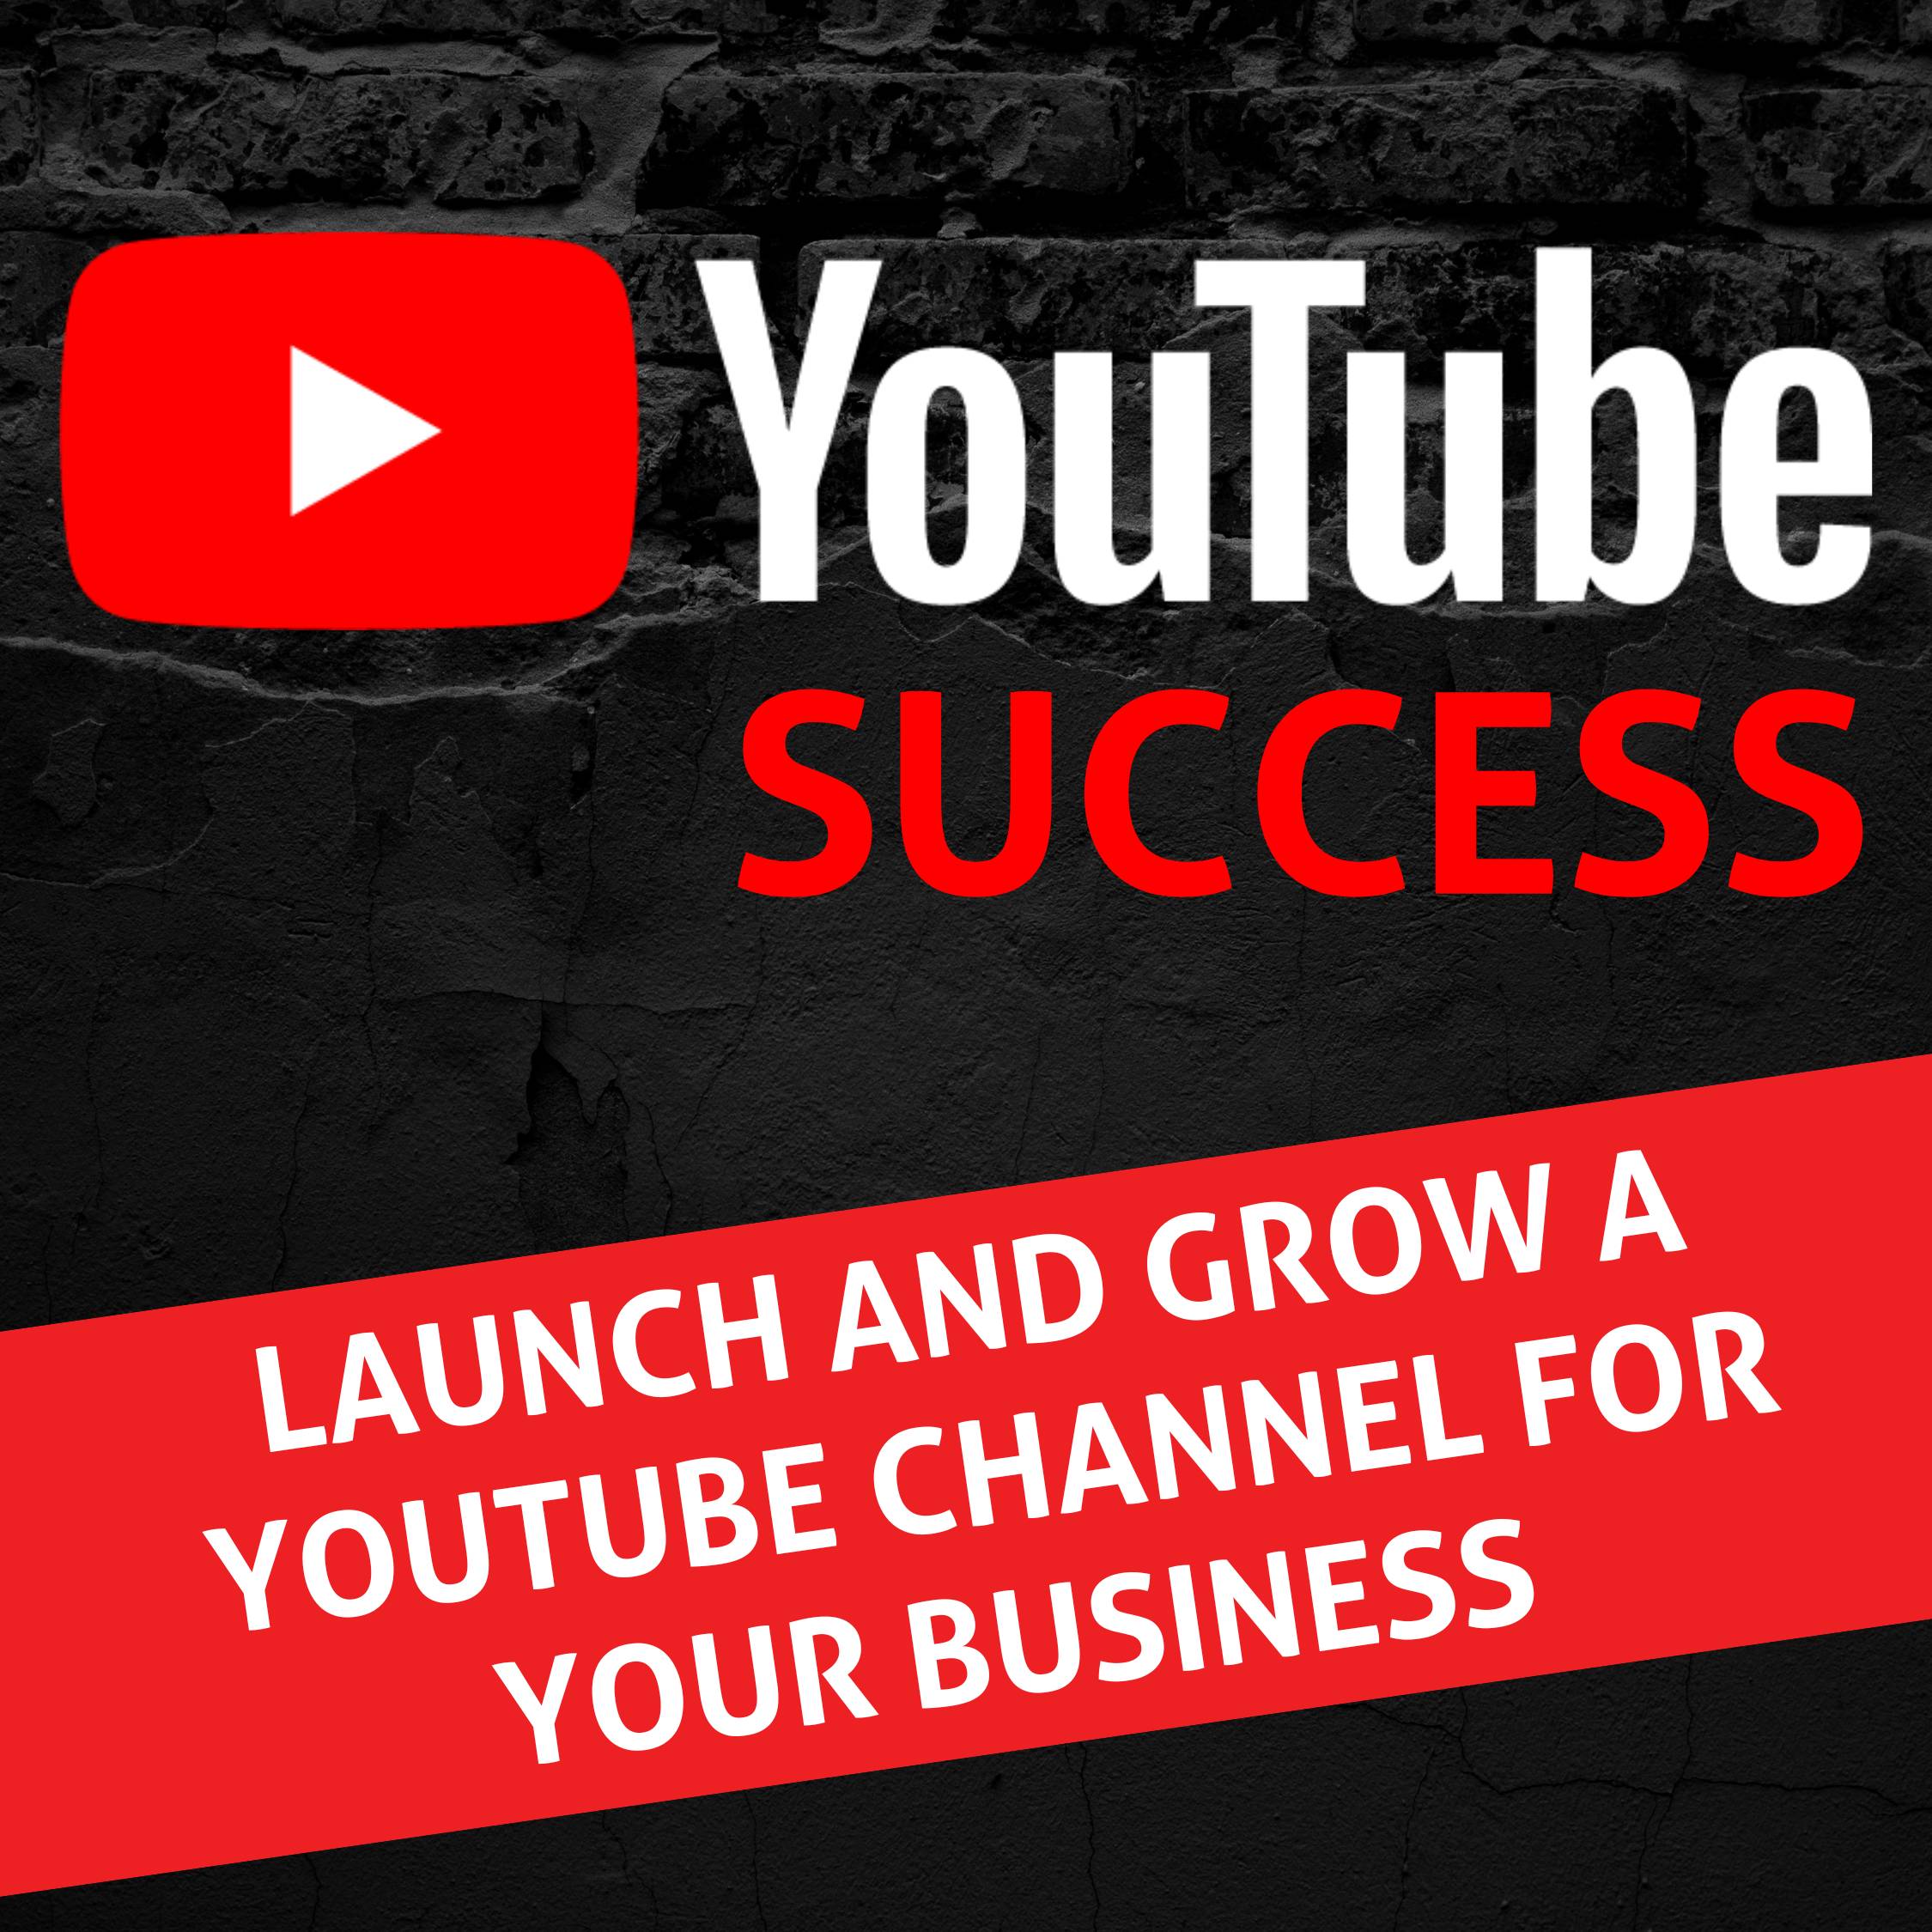 Show artwork for YouTube Success - YouTube for Business & YouTube Growth, Video Marketing